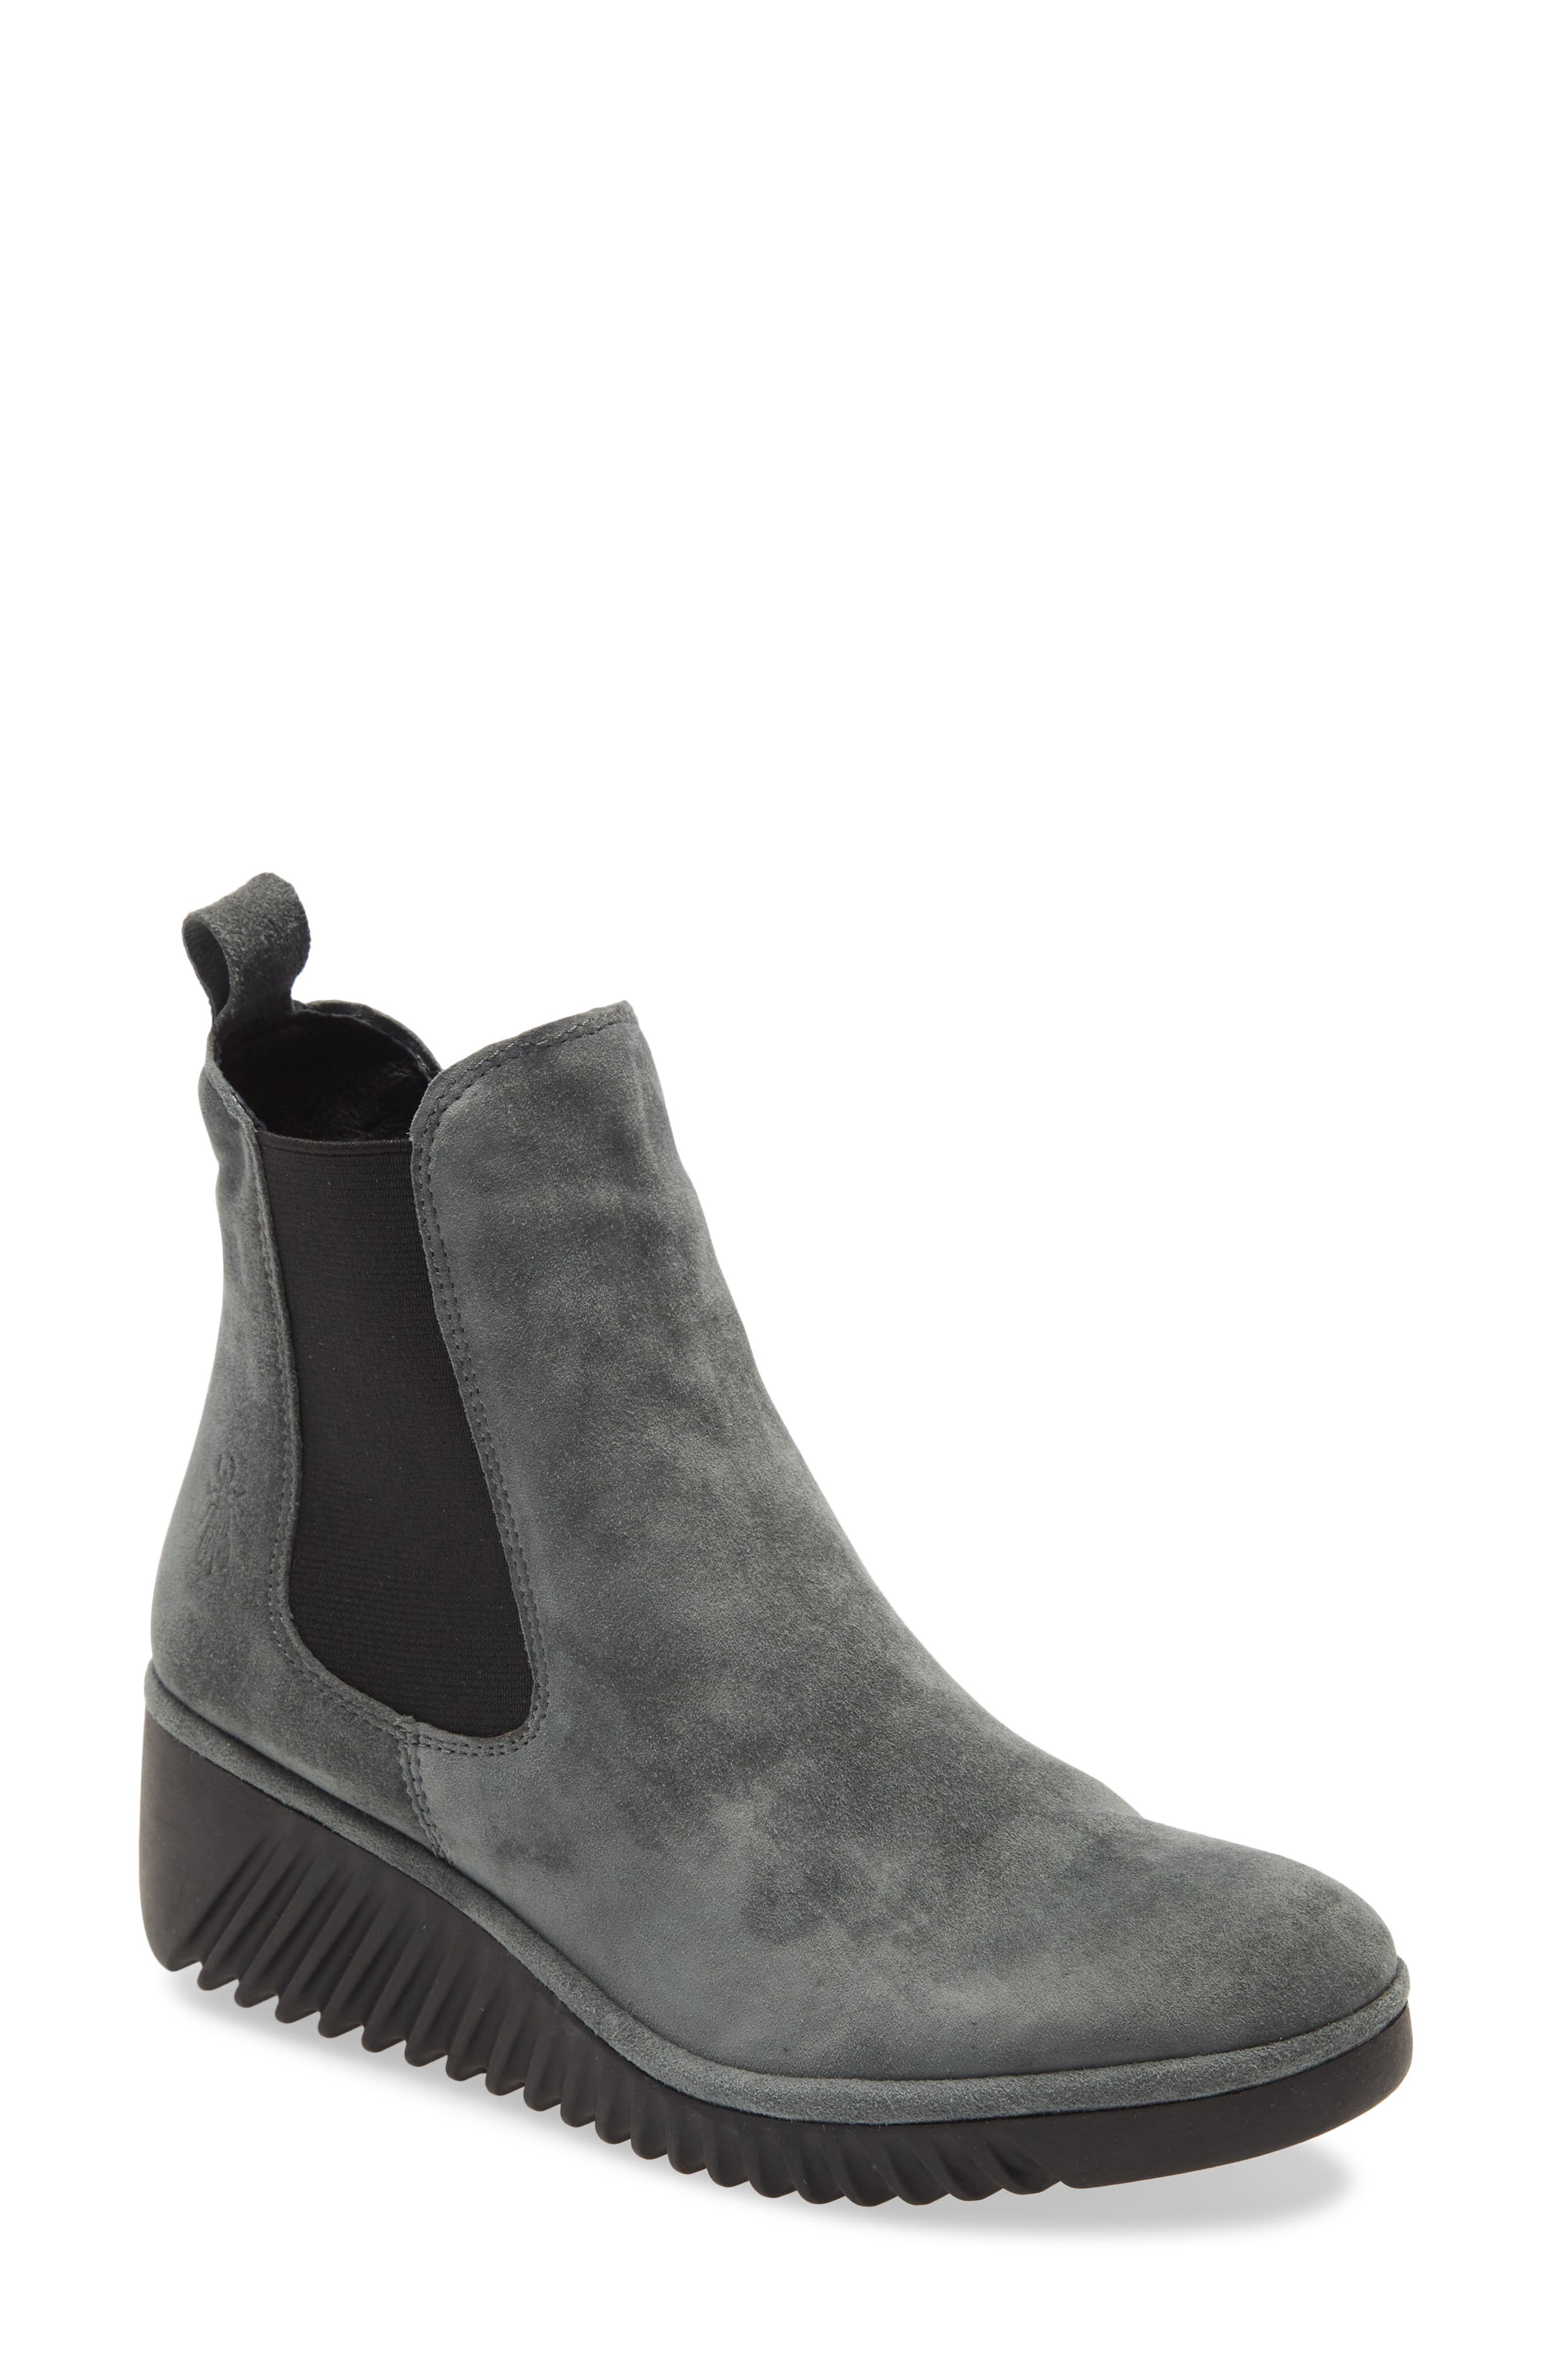 grey fly boots